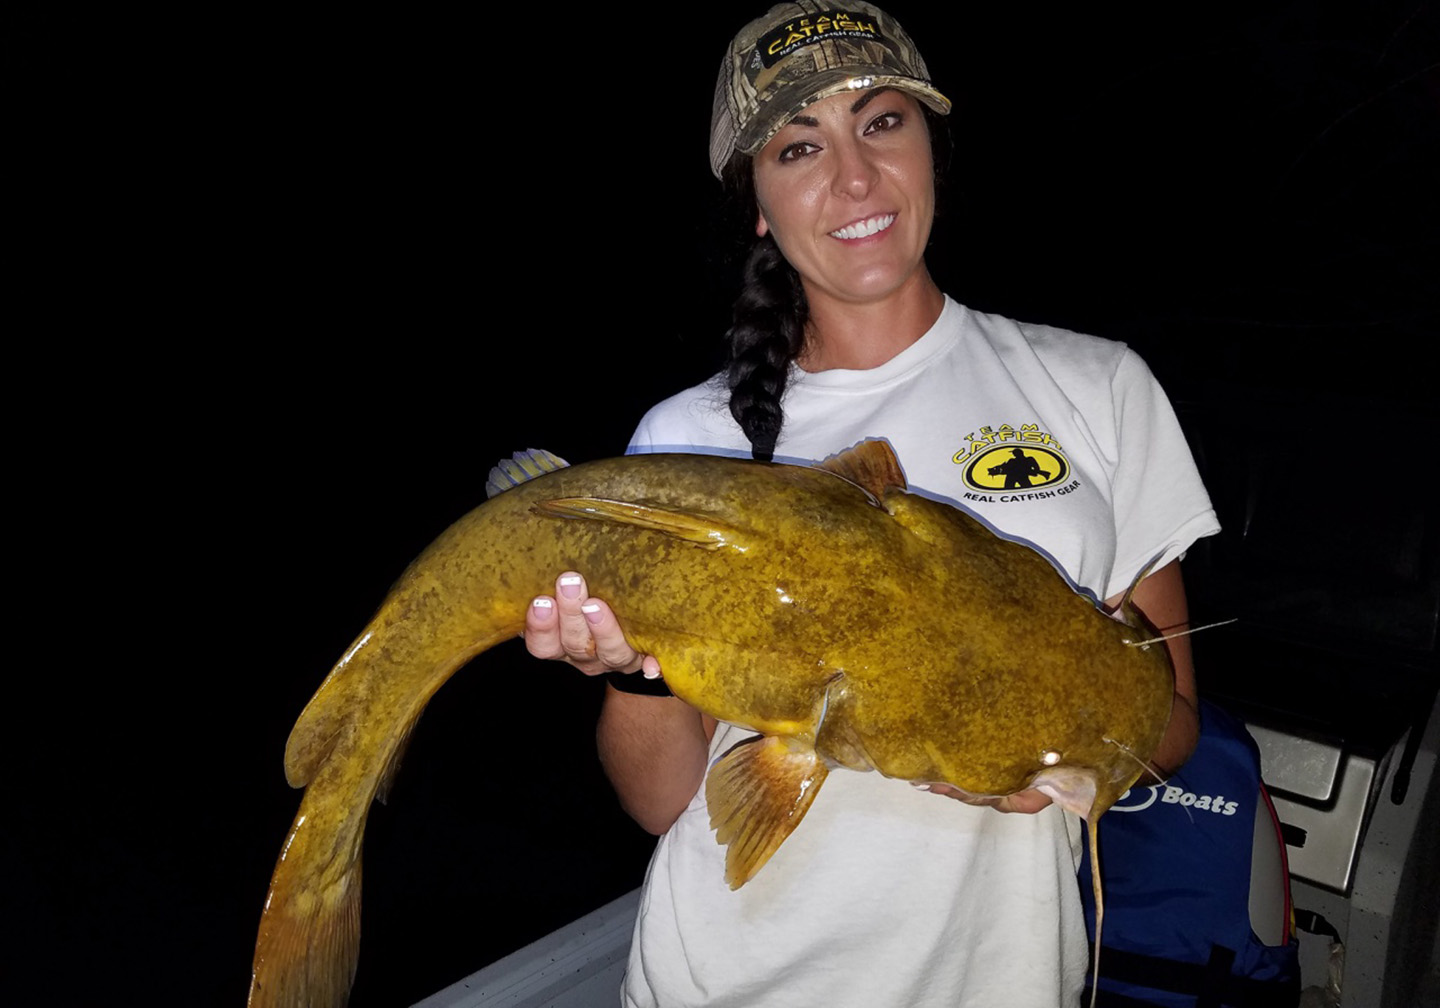 A smiling lady holding a Flathead Catfish at night